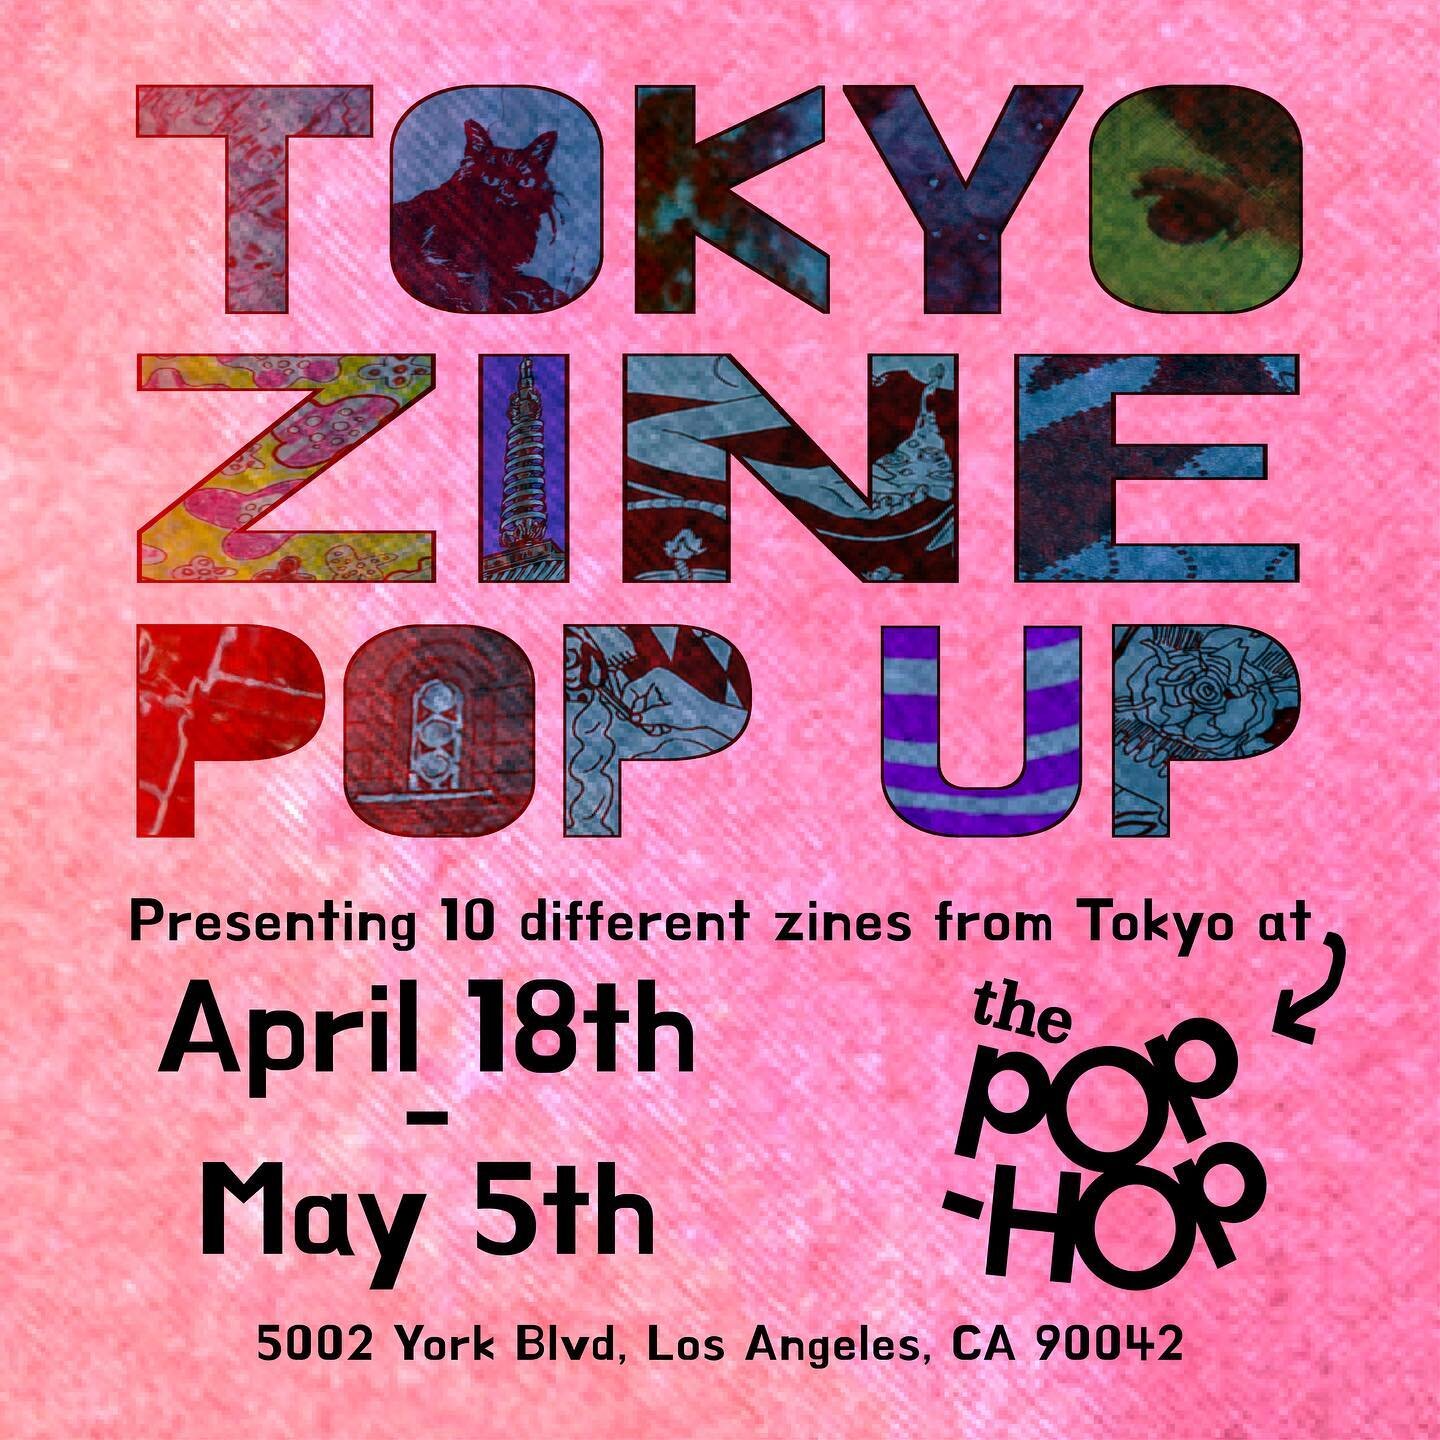 ZINES FROM TOKYO
POP-UP APR 18 &ndash;MAY 05
LINK IN BIO

The Pop-Hop is stoked to welcome TOKYO ZINE POP UP, a mini zine fest that brings Japanese zines abroad to your local gallery or indie bookshop! The Pop-Up will run for three weeks, and feature